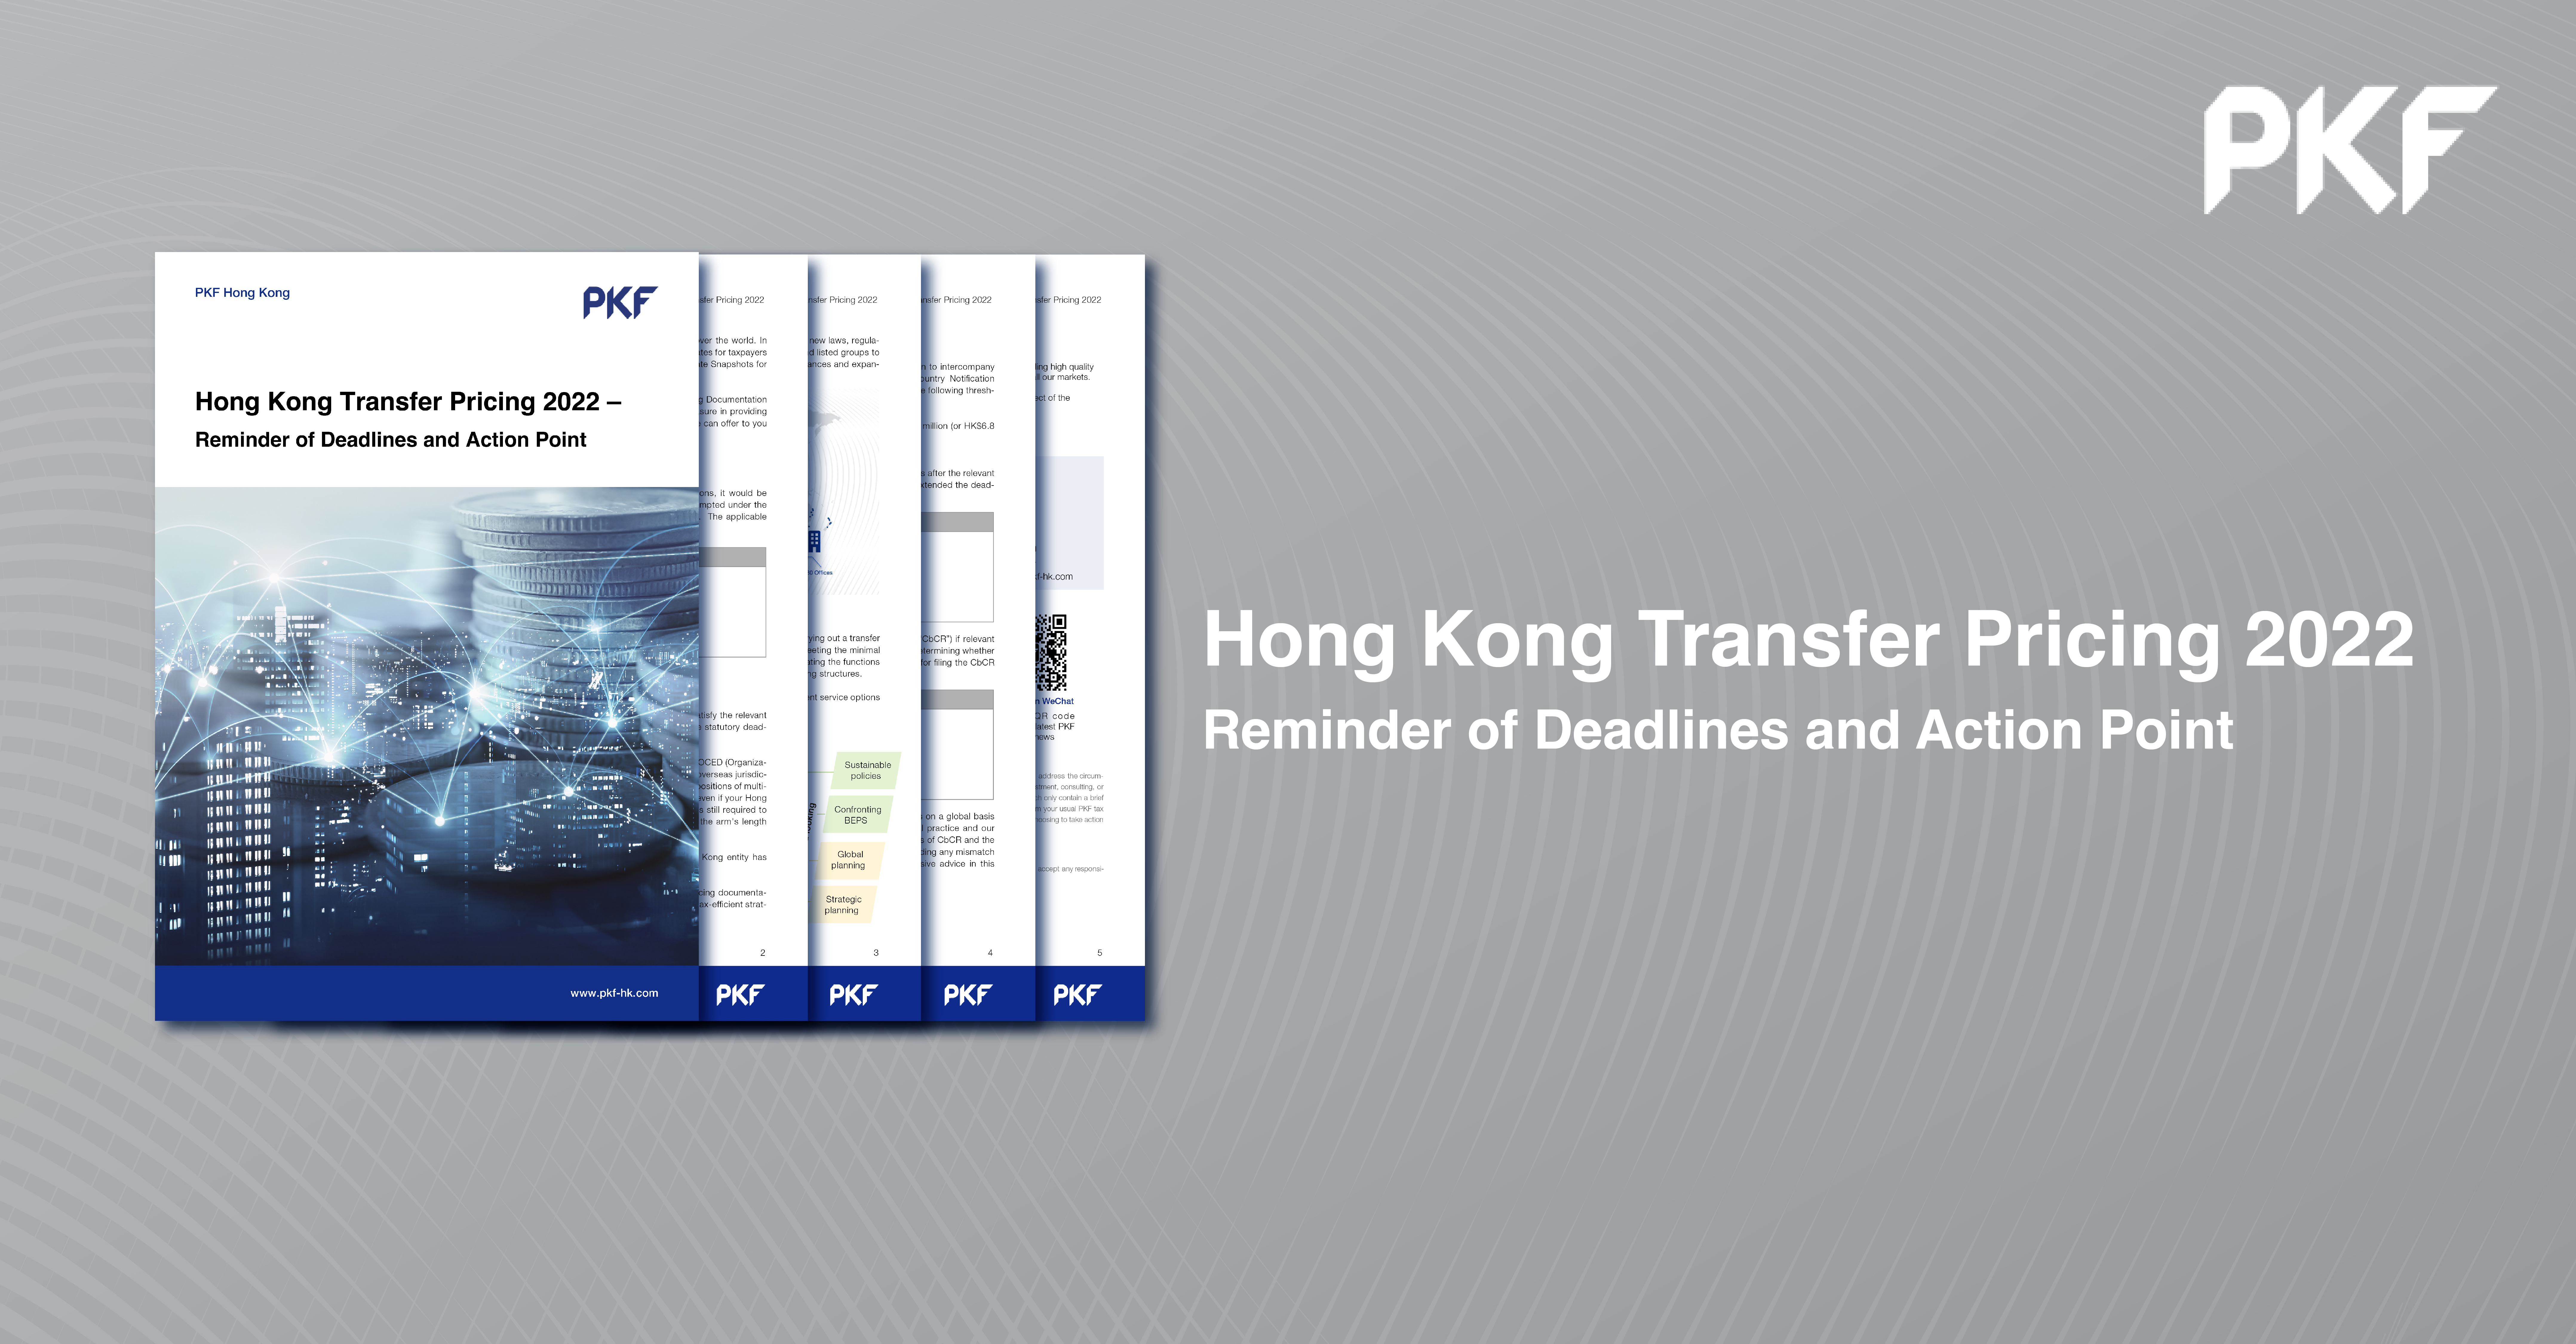 Hong Kong Transfer Pricing 2022: Reminder of Deadlines and Action Point